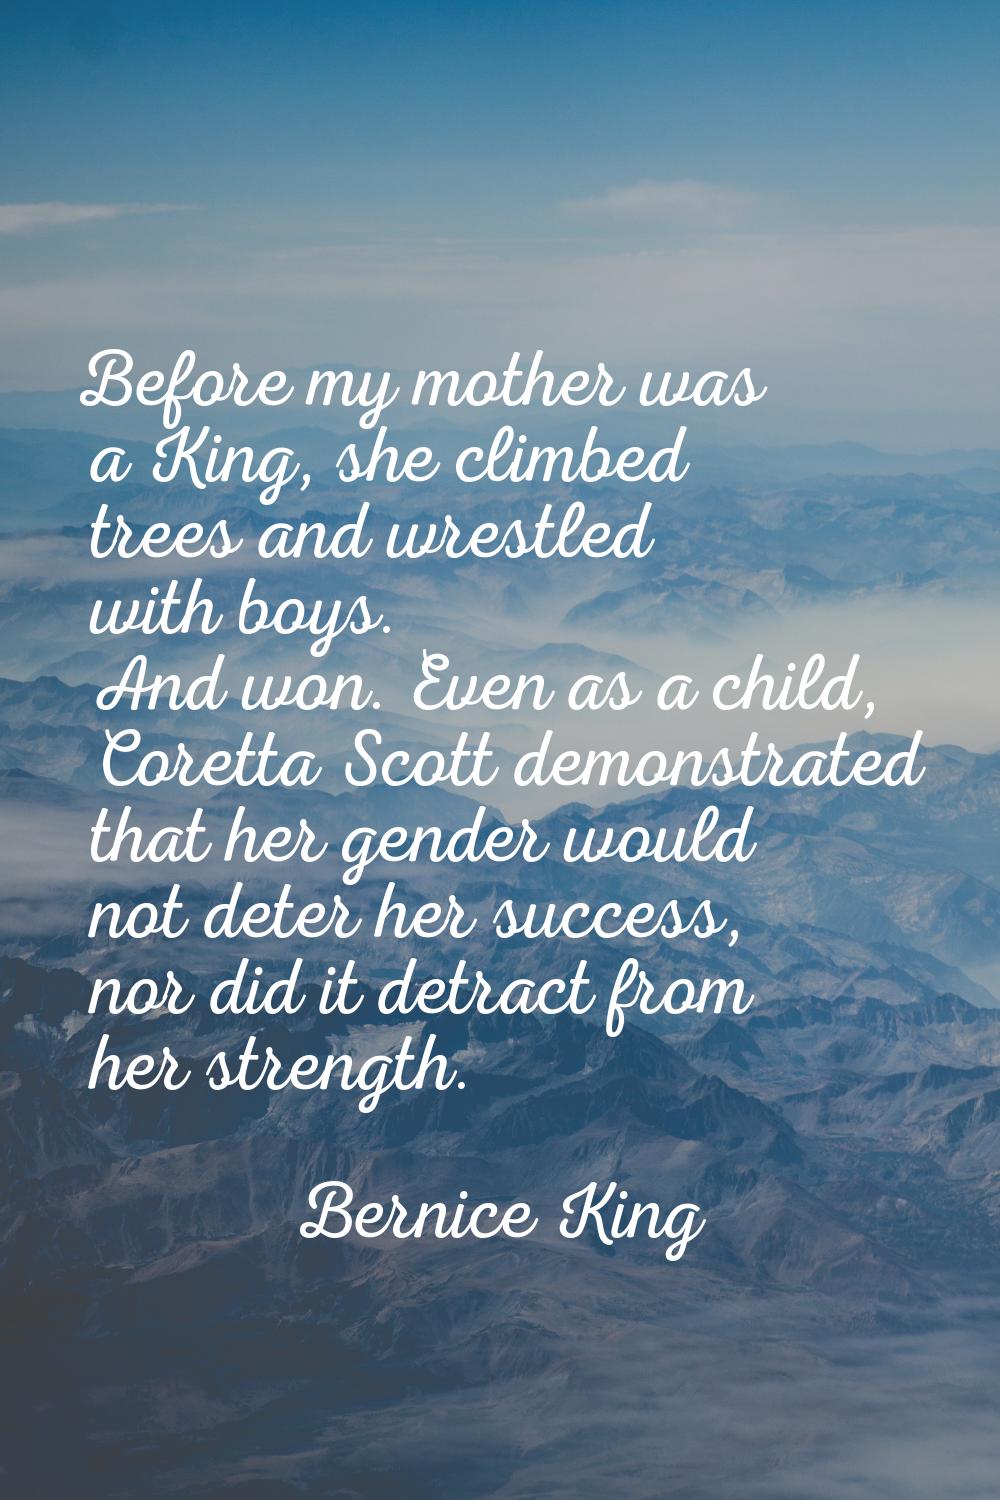 Before my mother was a King, she climbed trees and wrestled with boys. And won. Even as a child, Co